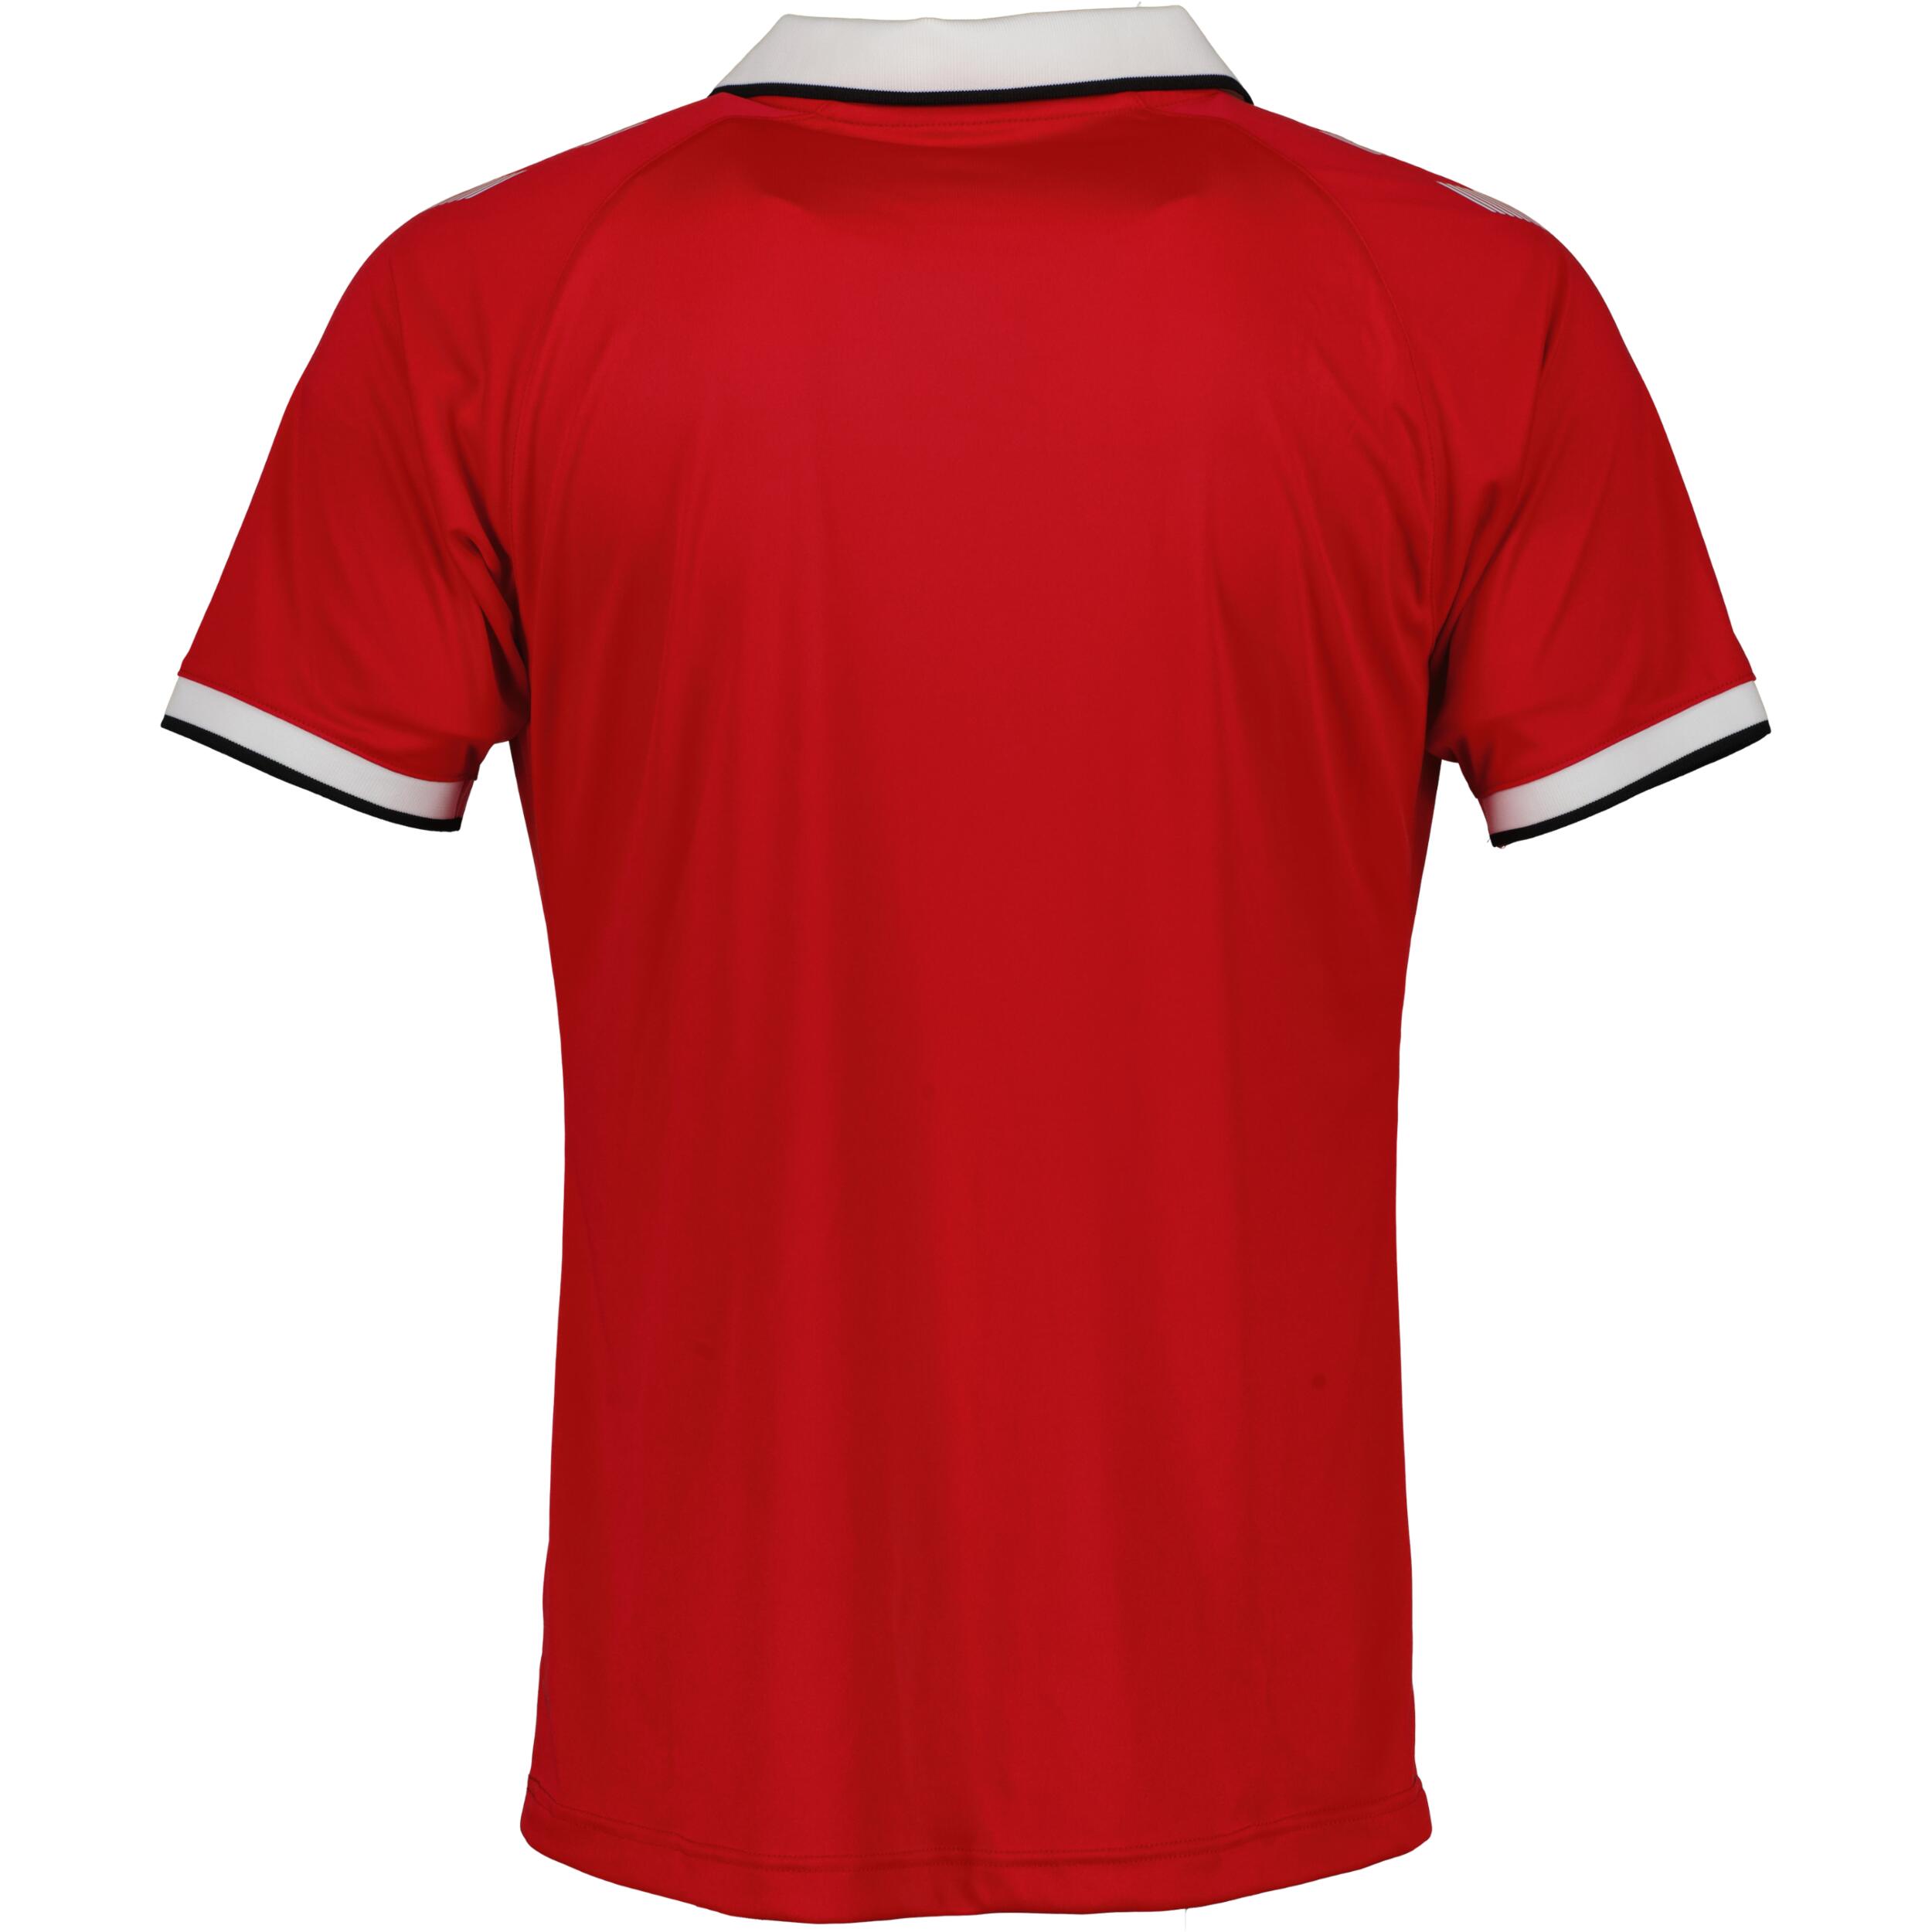 Impact jersey for men, great for football, in true red/white 2/3